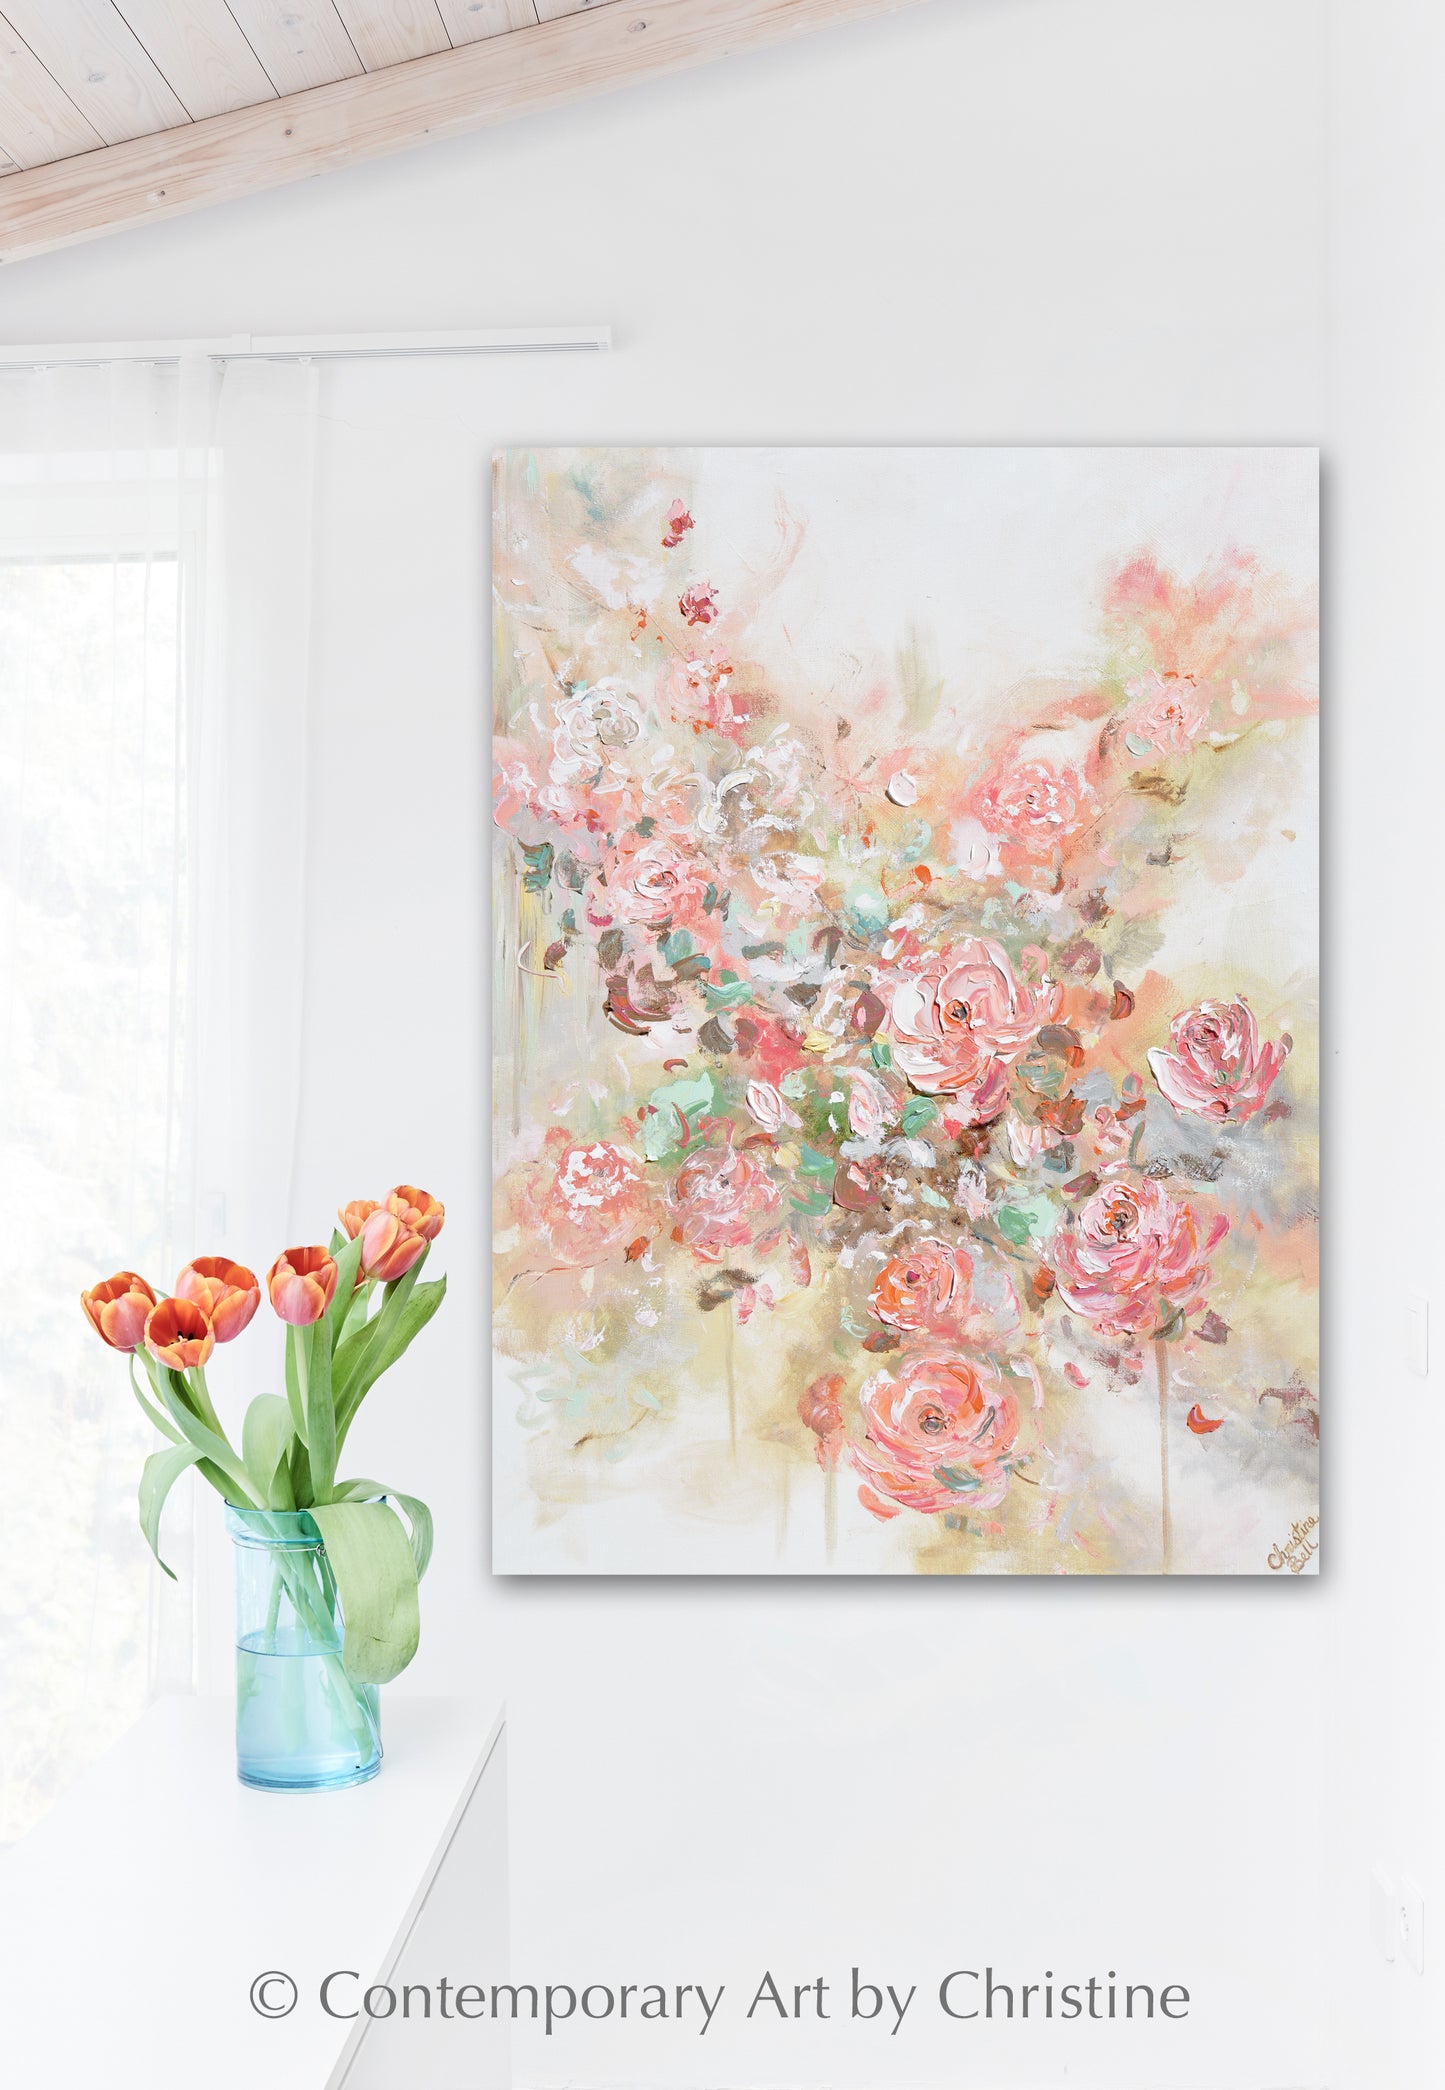 ORIGINAL Art Abstract Floral Painting Textured Pink Flowers Coral Peach Roses Wall Decor 30x40"